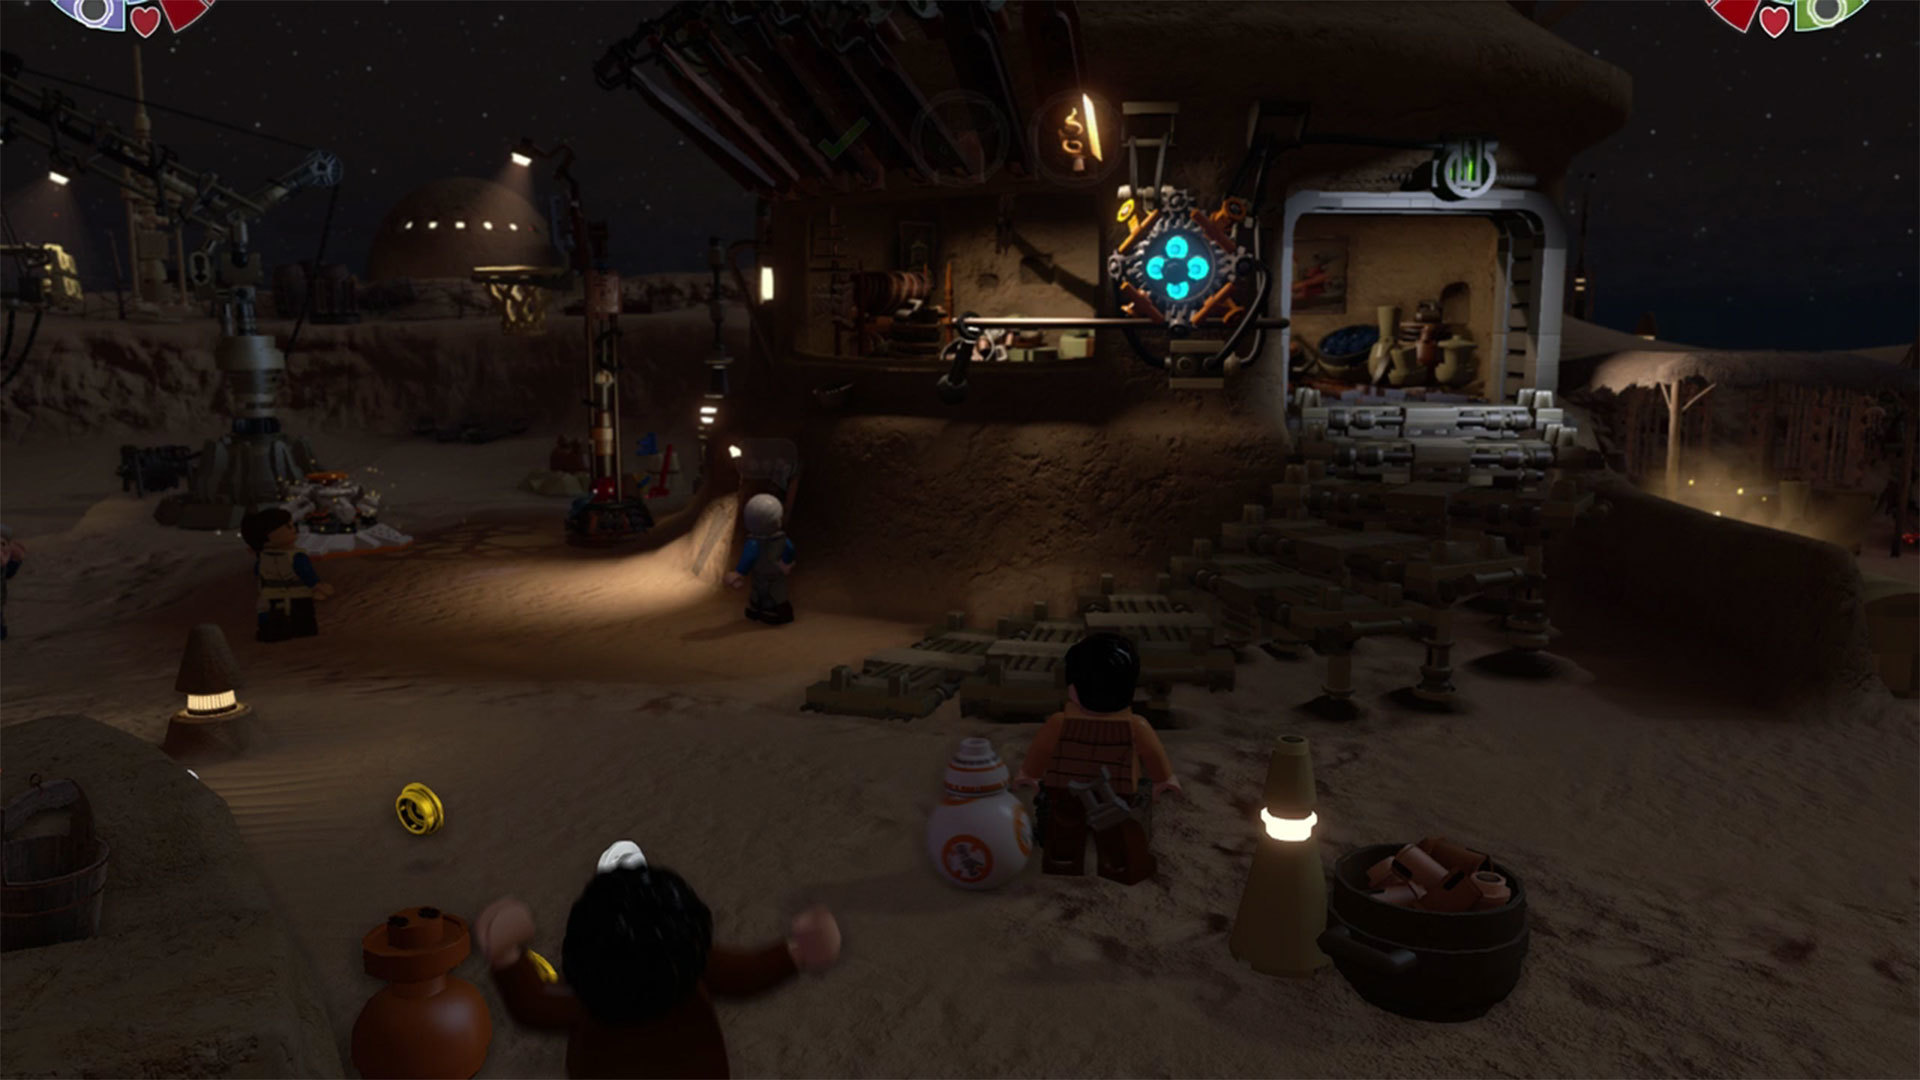 lego star wars the force awakens download